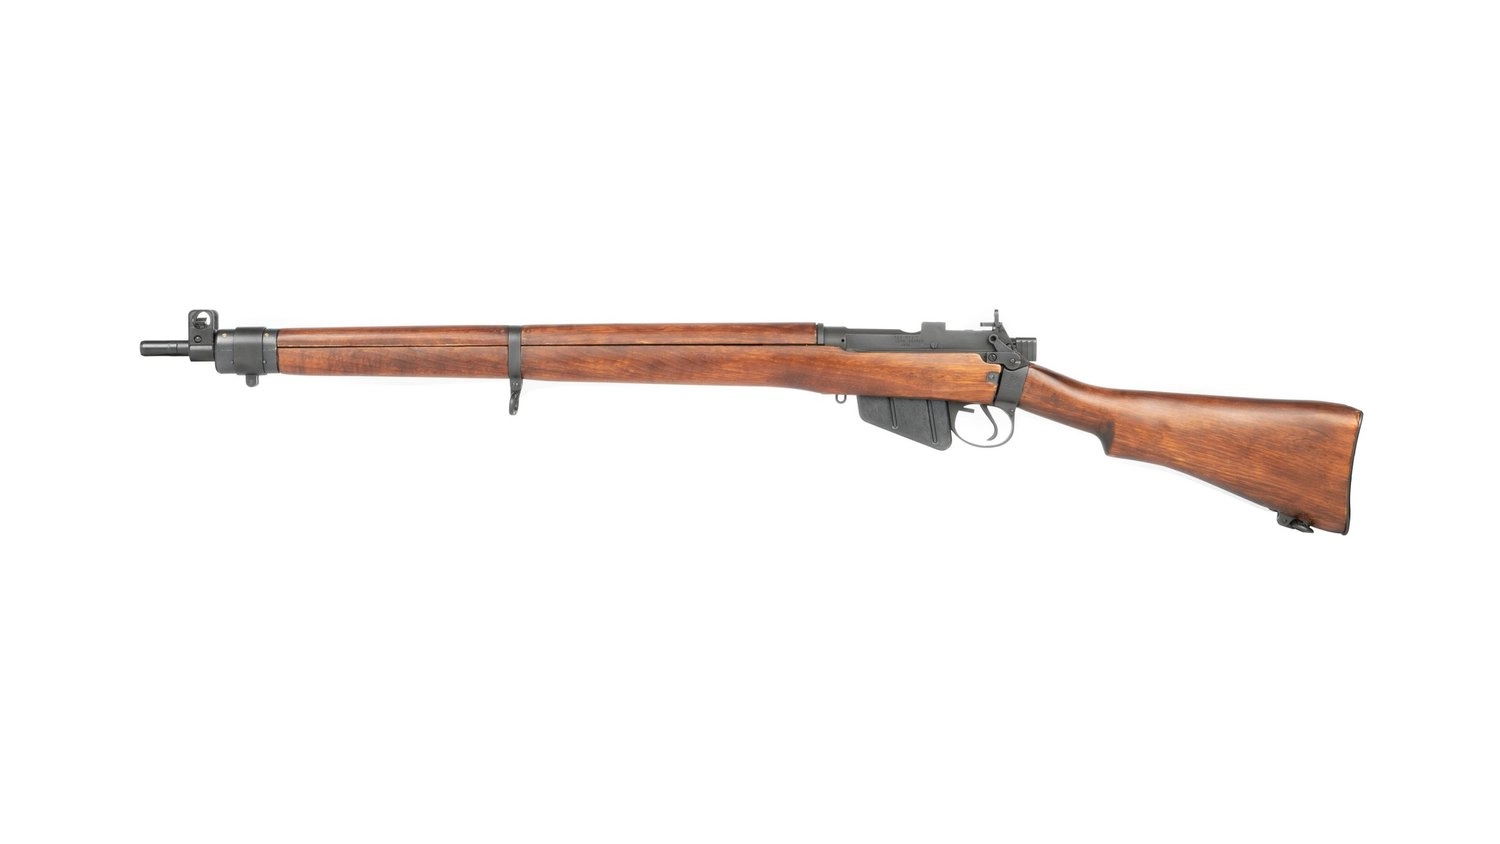 Ares Lee Enfield SMLE British No.4 MK1